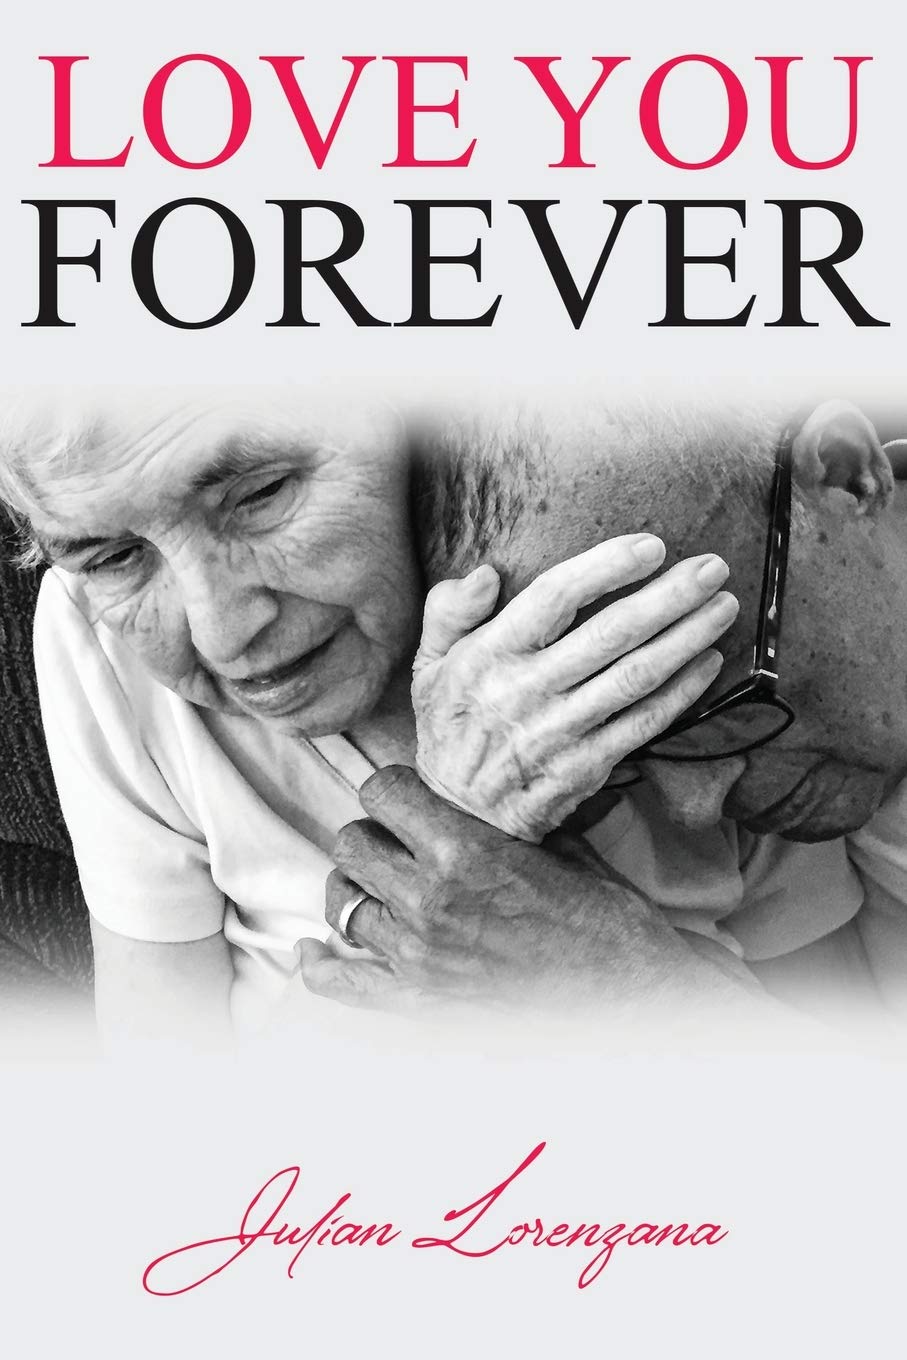 Julian Lorenzana has released his book, Love You Forever; supported by Author’s Tranquility Press